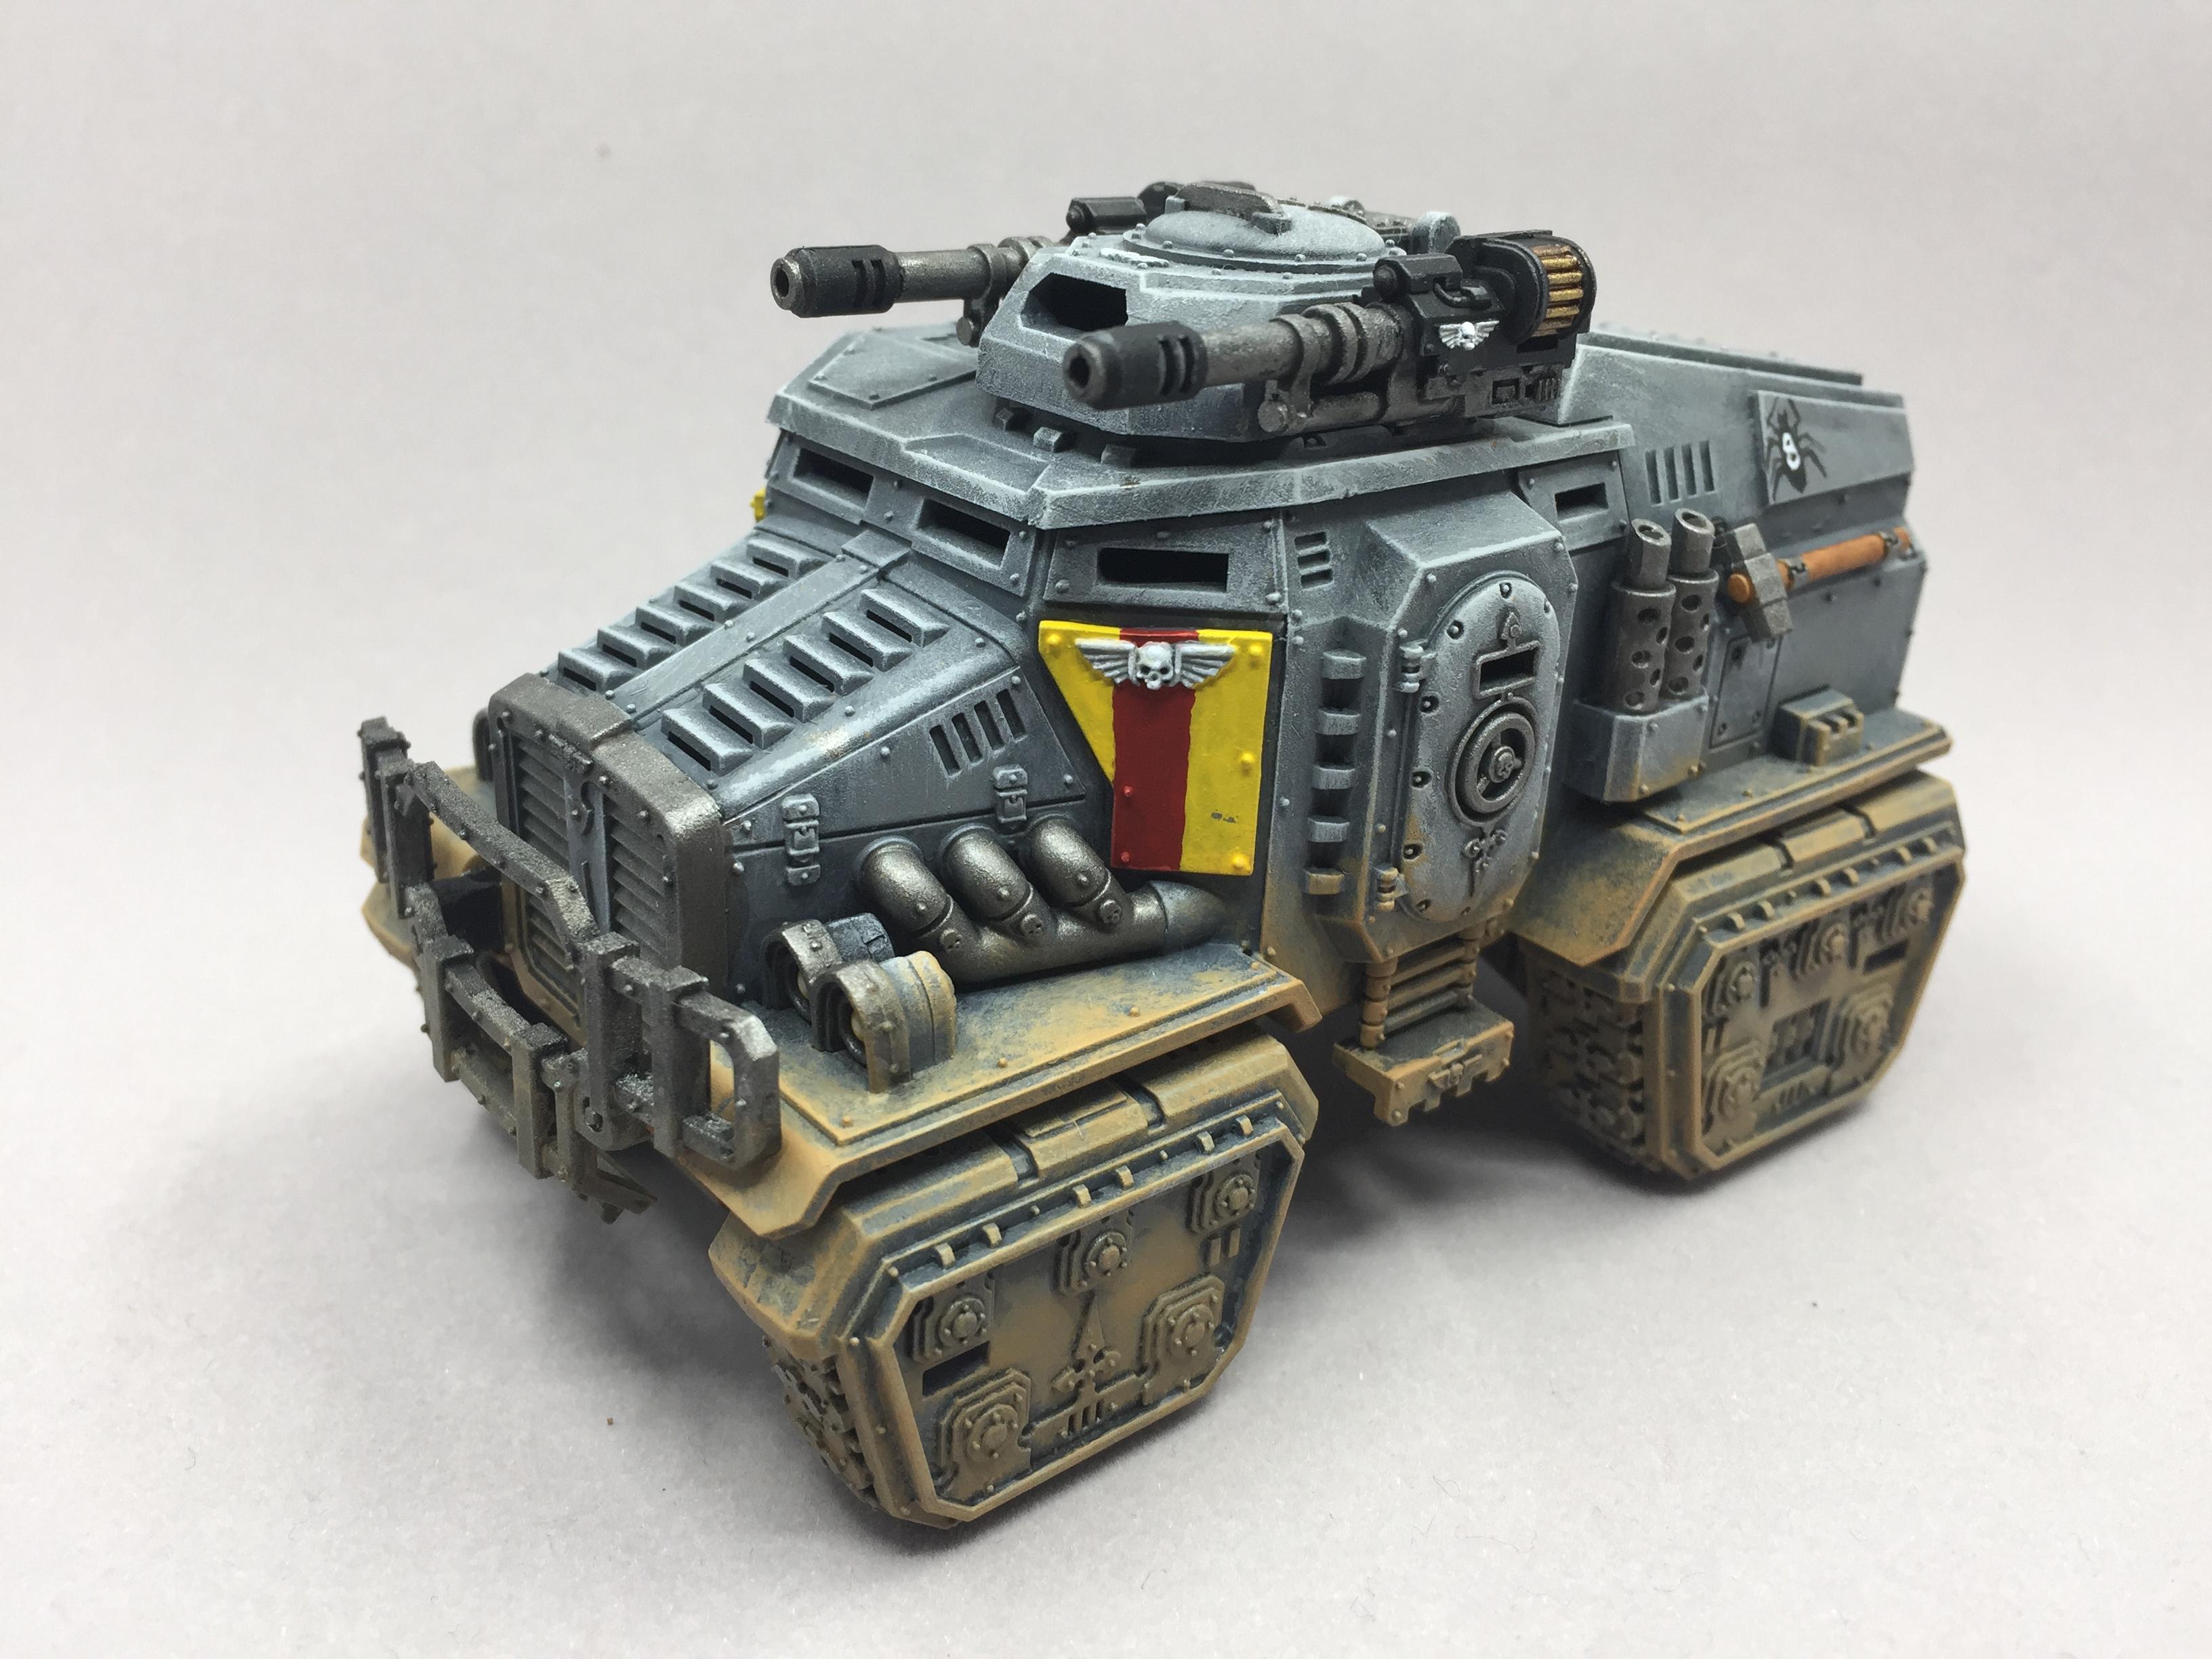 Taurox front